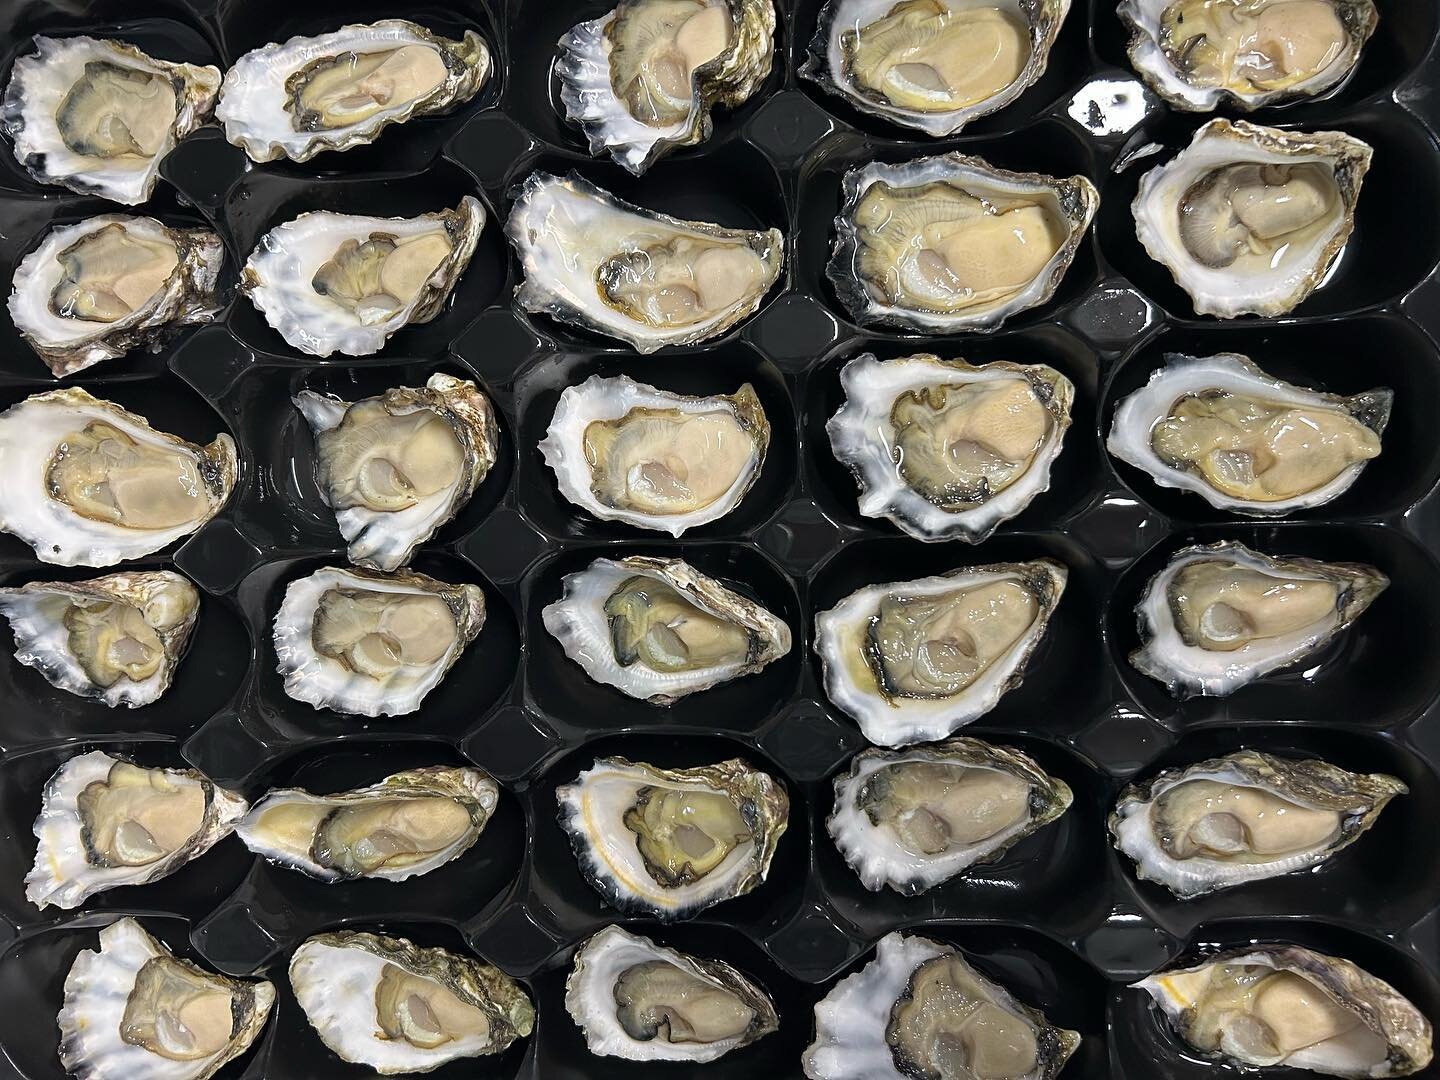 Todays specials - We have a new load cracking  oysters from Port Stephens, line caught and spiked #SWR Mahi from our team here at NWS, sashimi platters and #SWR cooked spanner crabs. We have a very limited supply of #SWR XL school prawns so these won